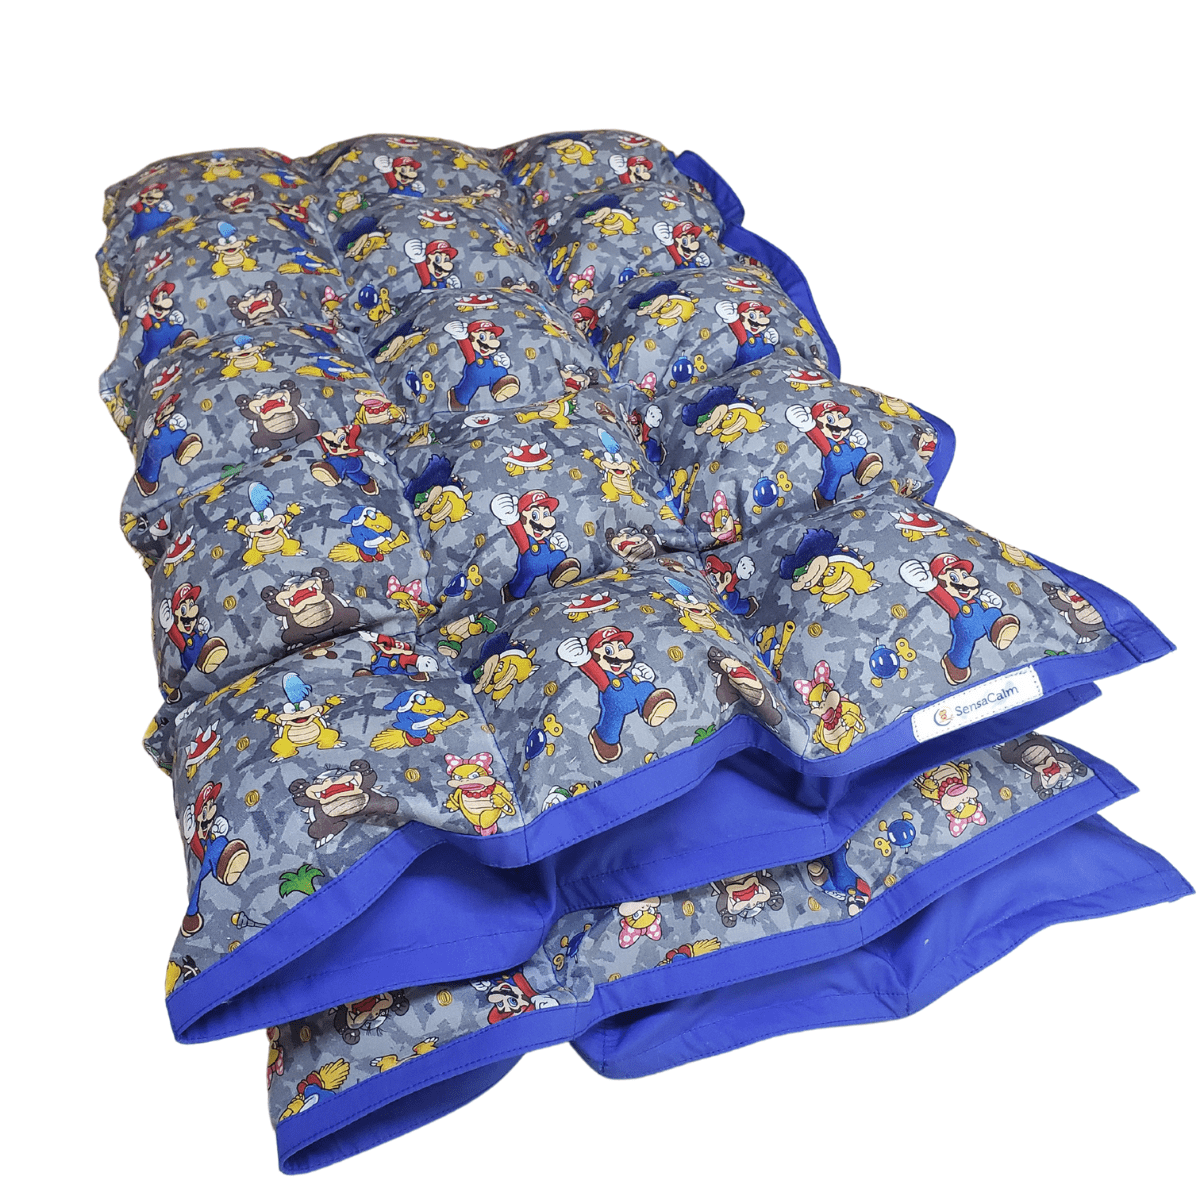 Clearance Cuddle Weighted Blanket - Medium 6 lb Super Mario (for 40 lb user)